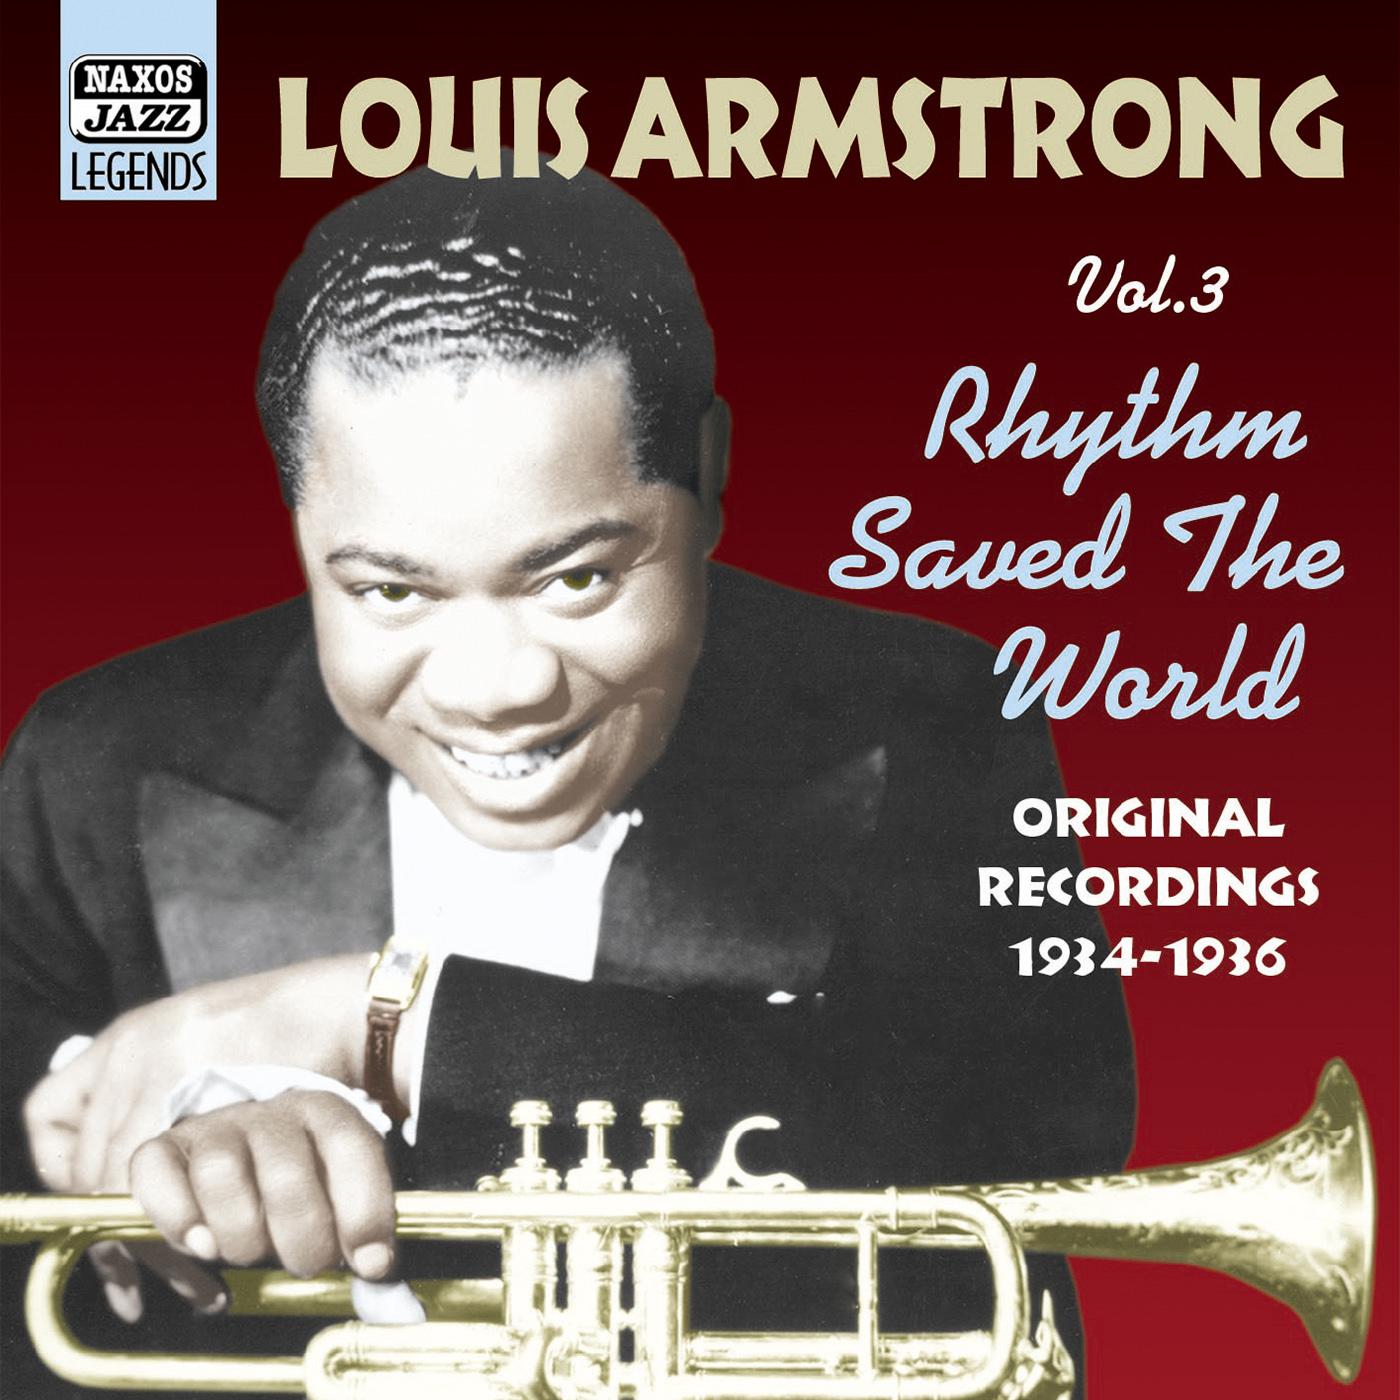 ARMSTRONG, Louis: Rhythm Saved The World (1934-1936) (Louis Armstrong, Vol. 3)